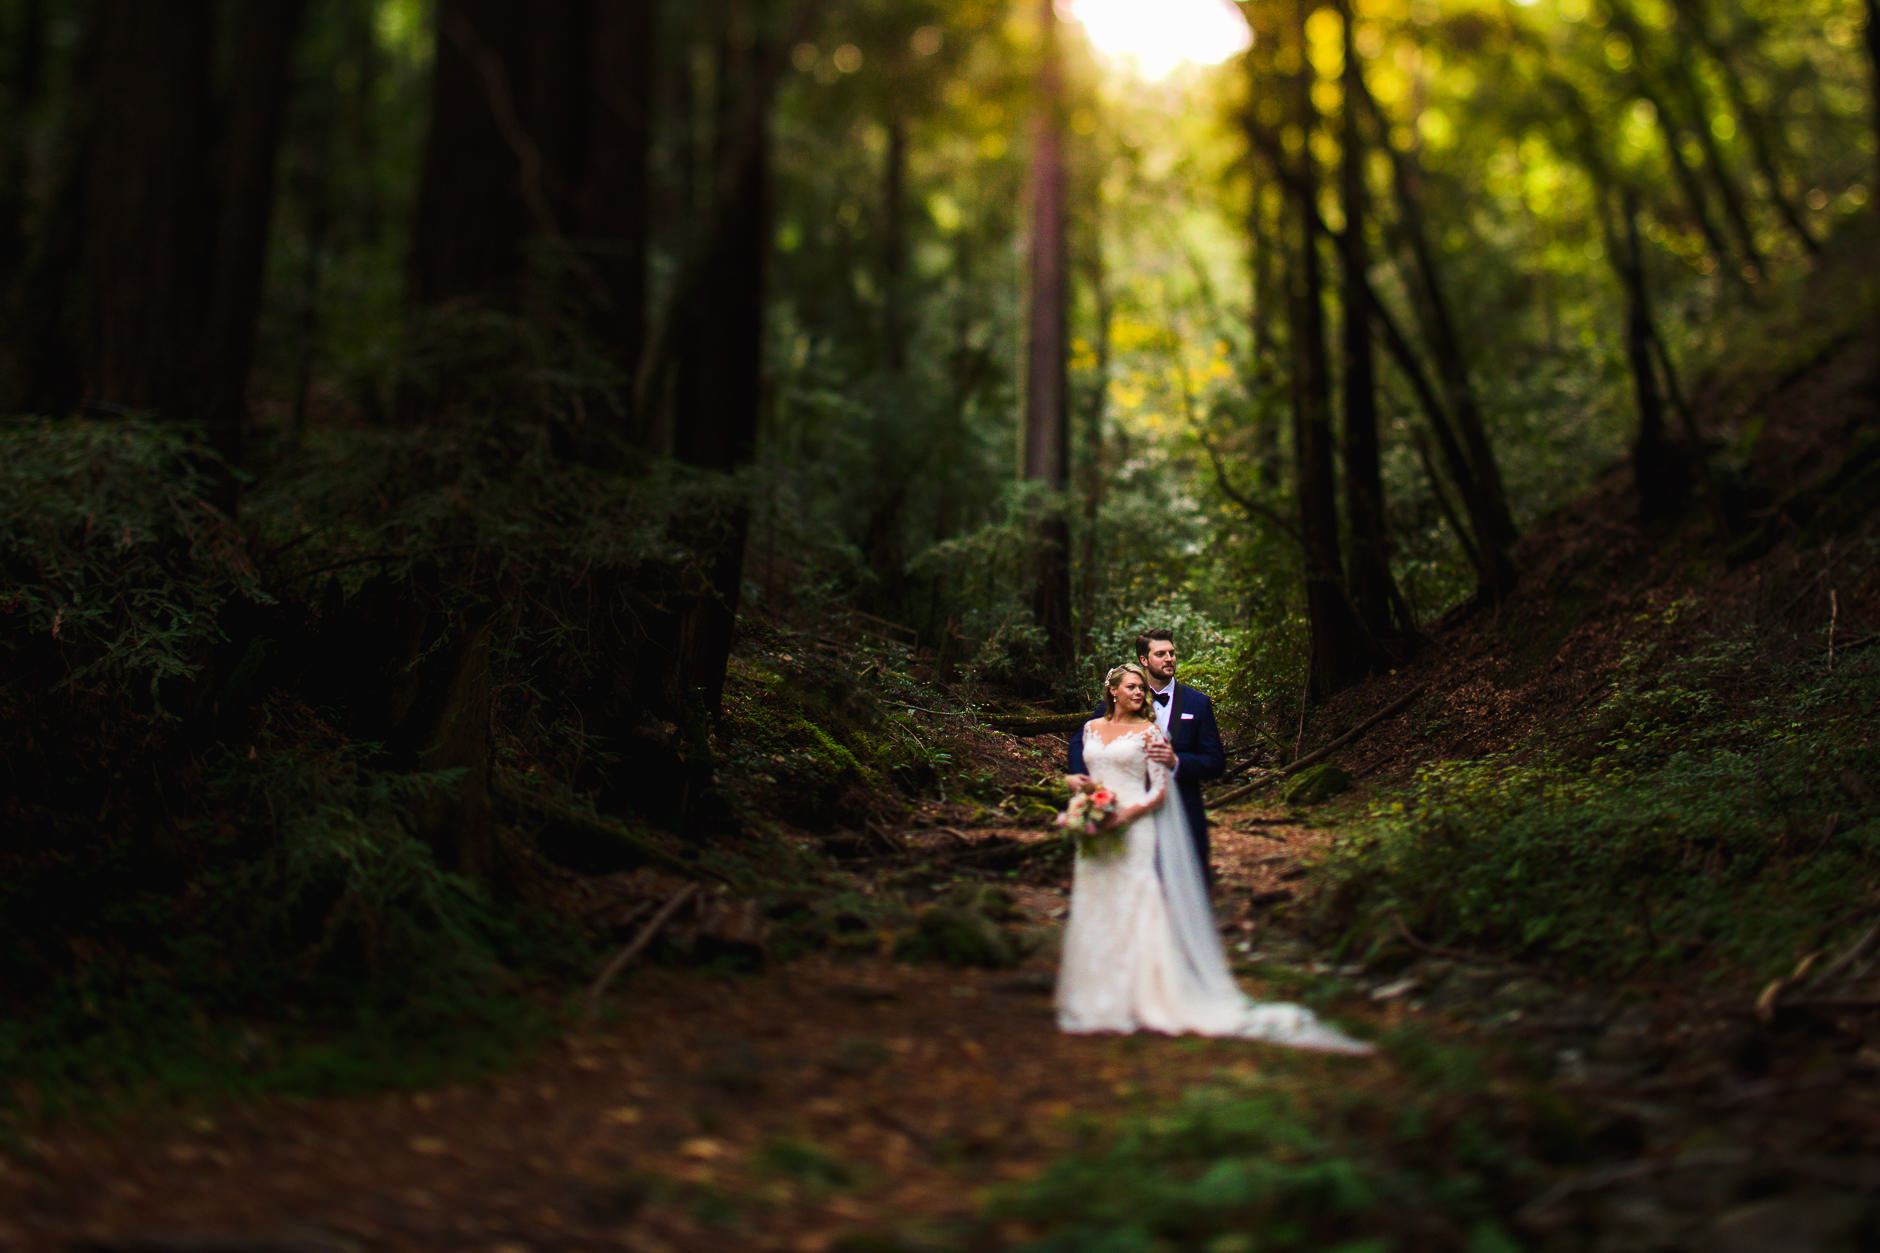 Saratoga Springs Wedding California San Francisco Photographer Bride and Groom in the Redwoods with Tilt Shift Lens